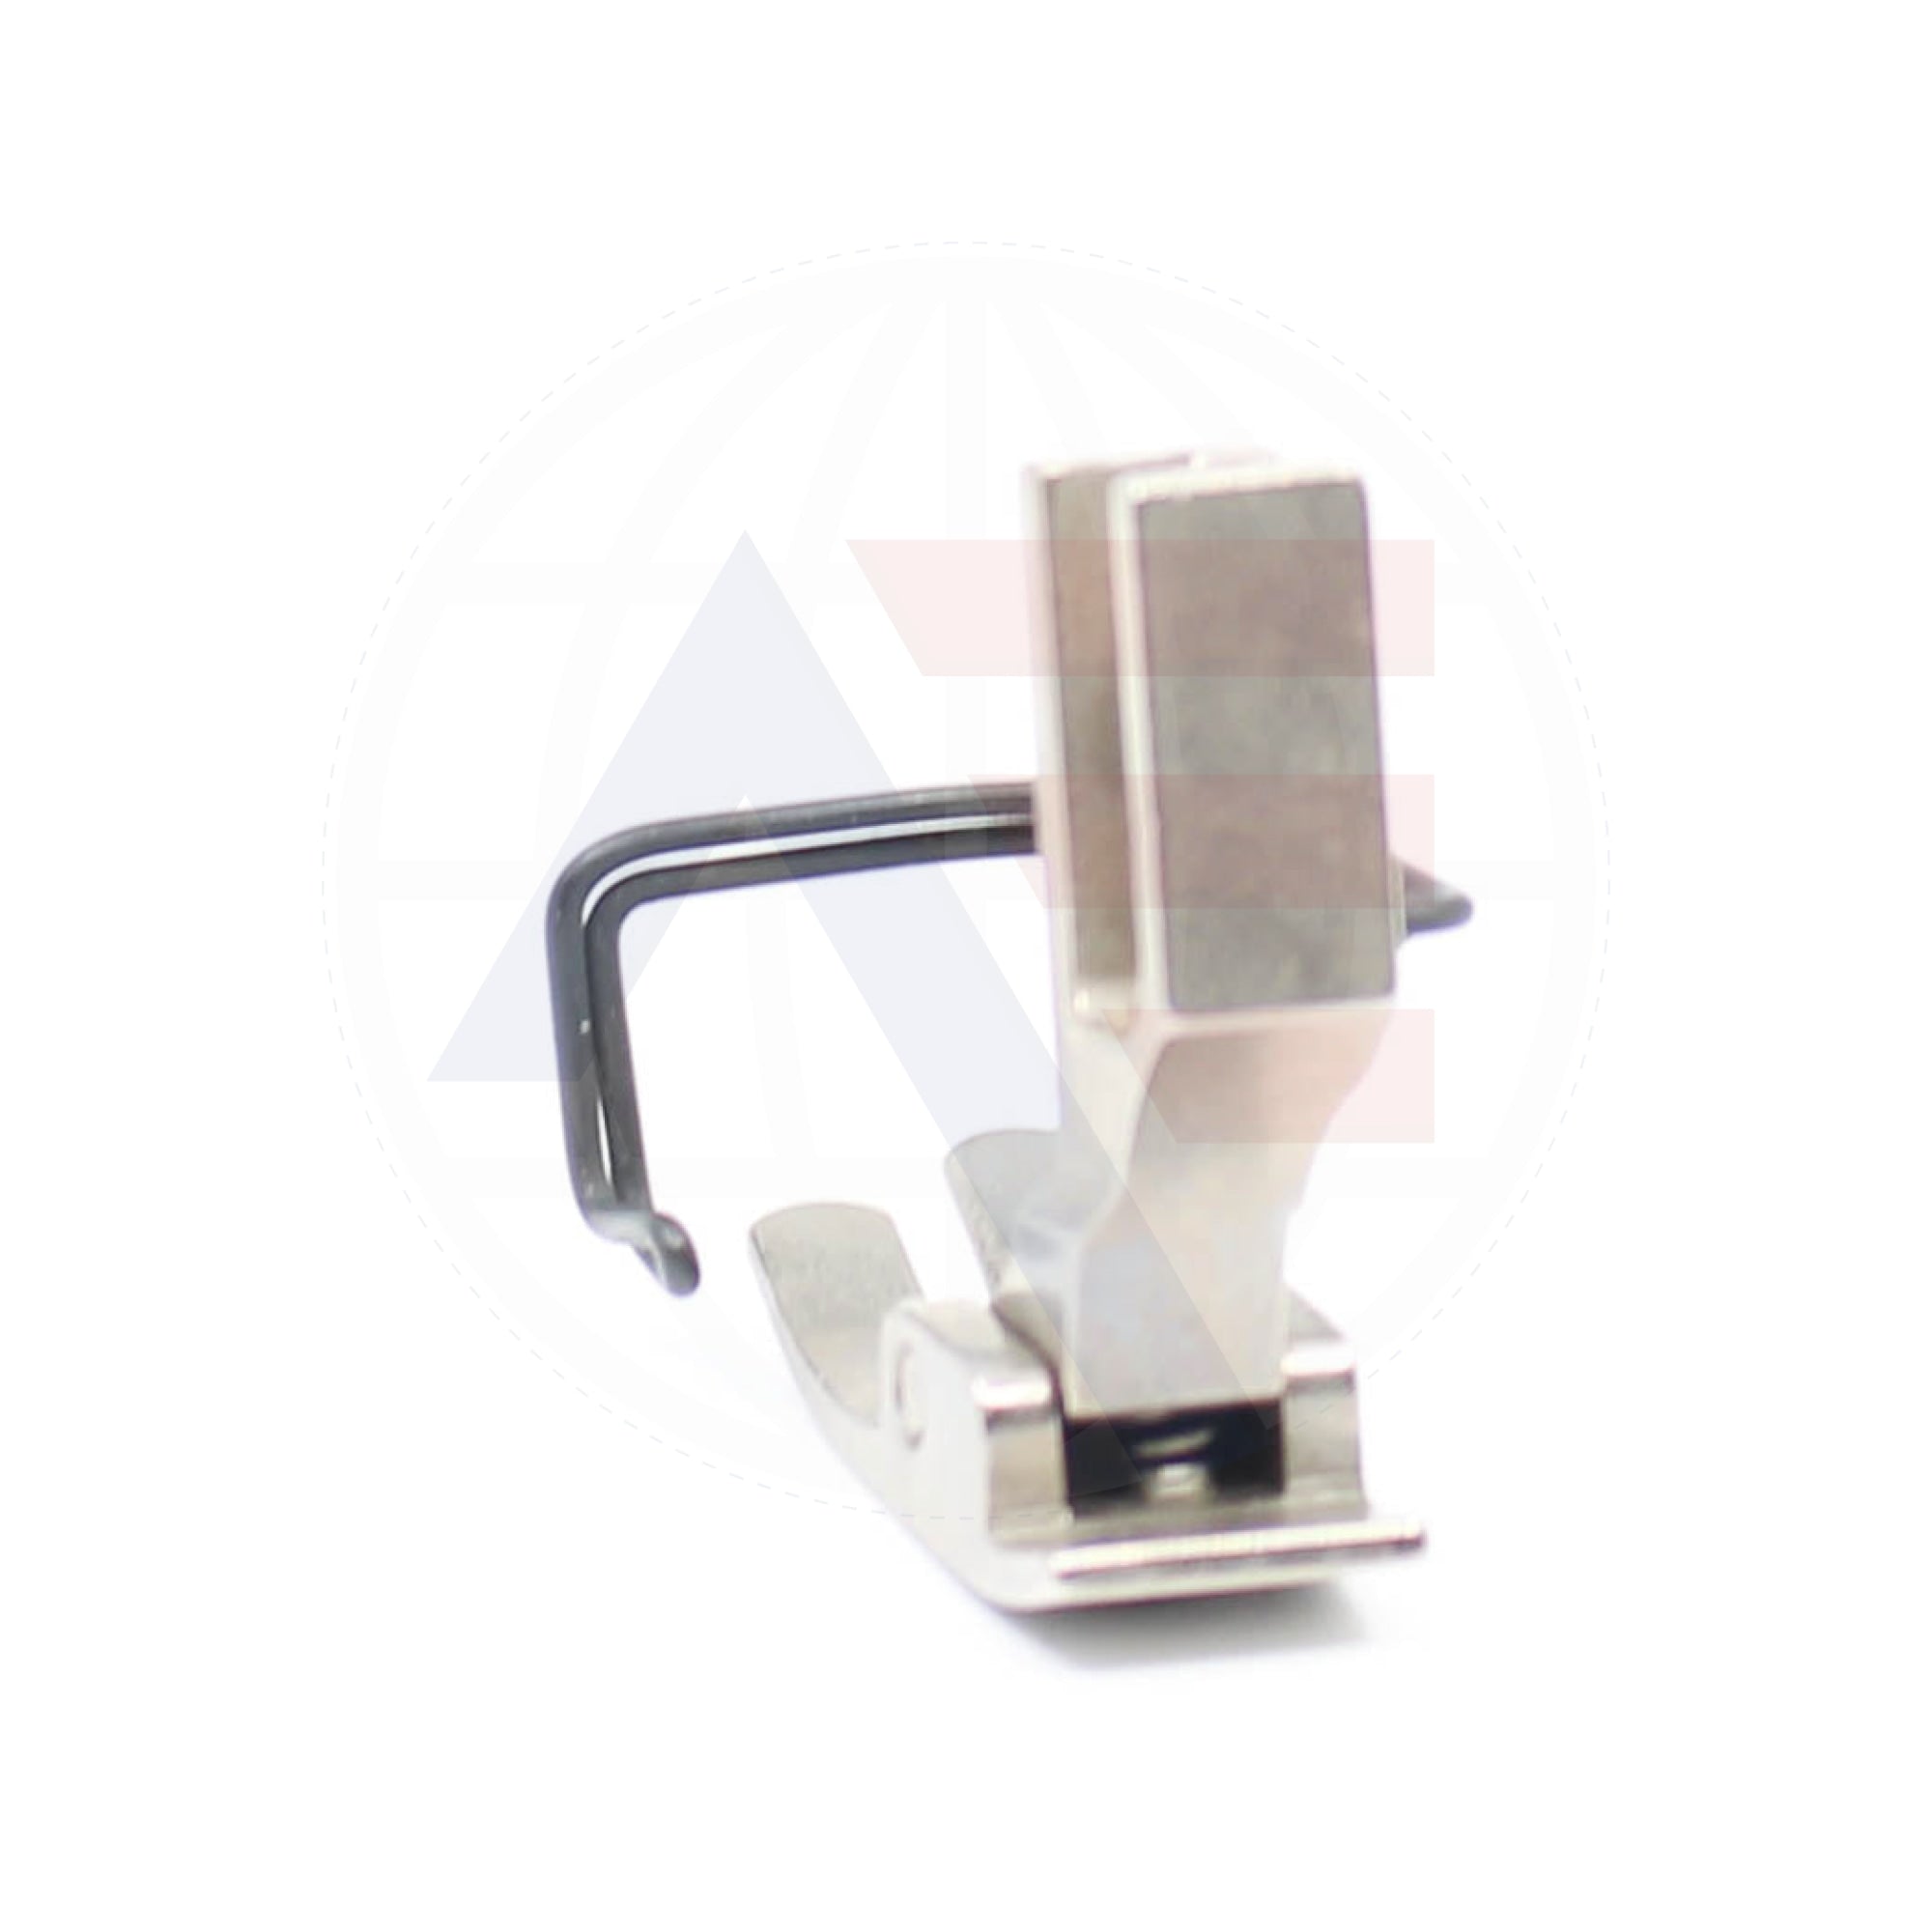 B15240120Ba Presser Foot With Finger Guard Sewing Machine Spare Parts